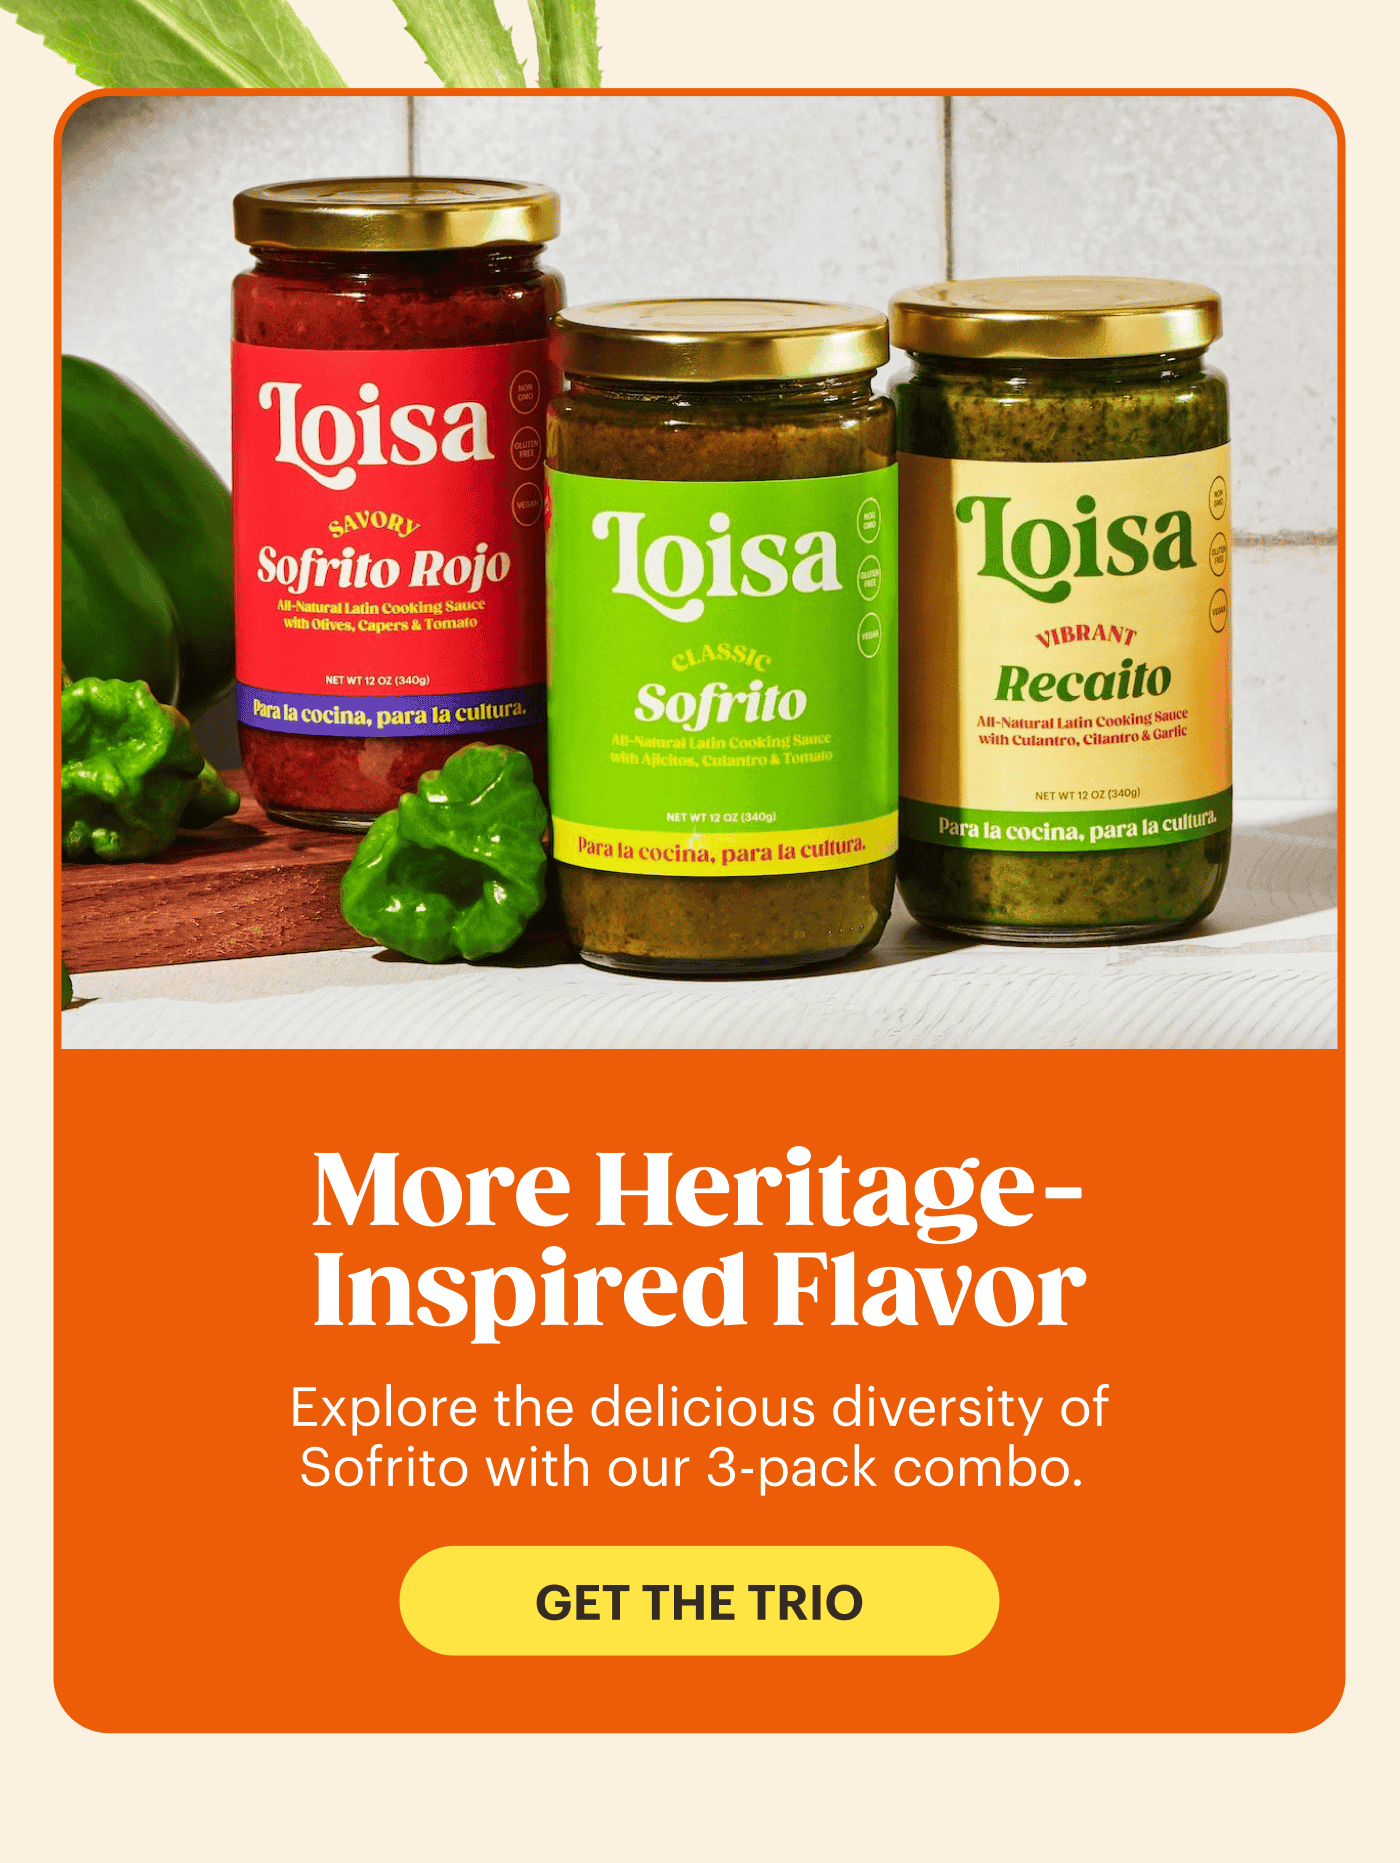 More Heritage-Inspired Flavor Explore the delicious diversity of Sofrito with our 3-pack combo.